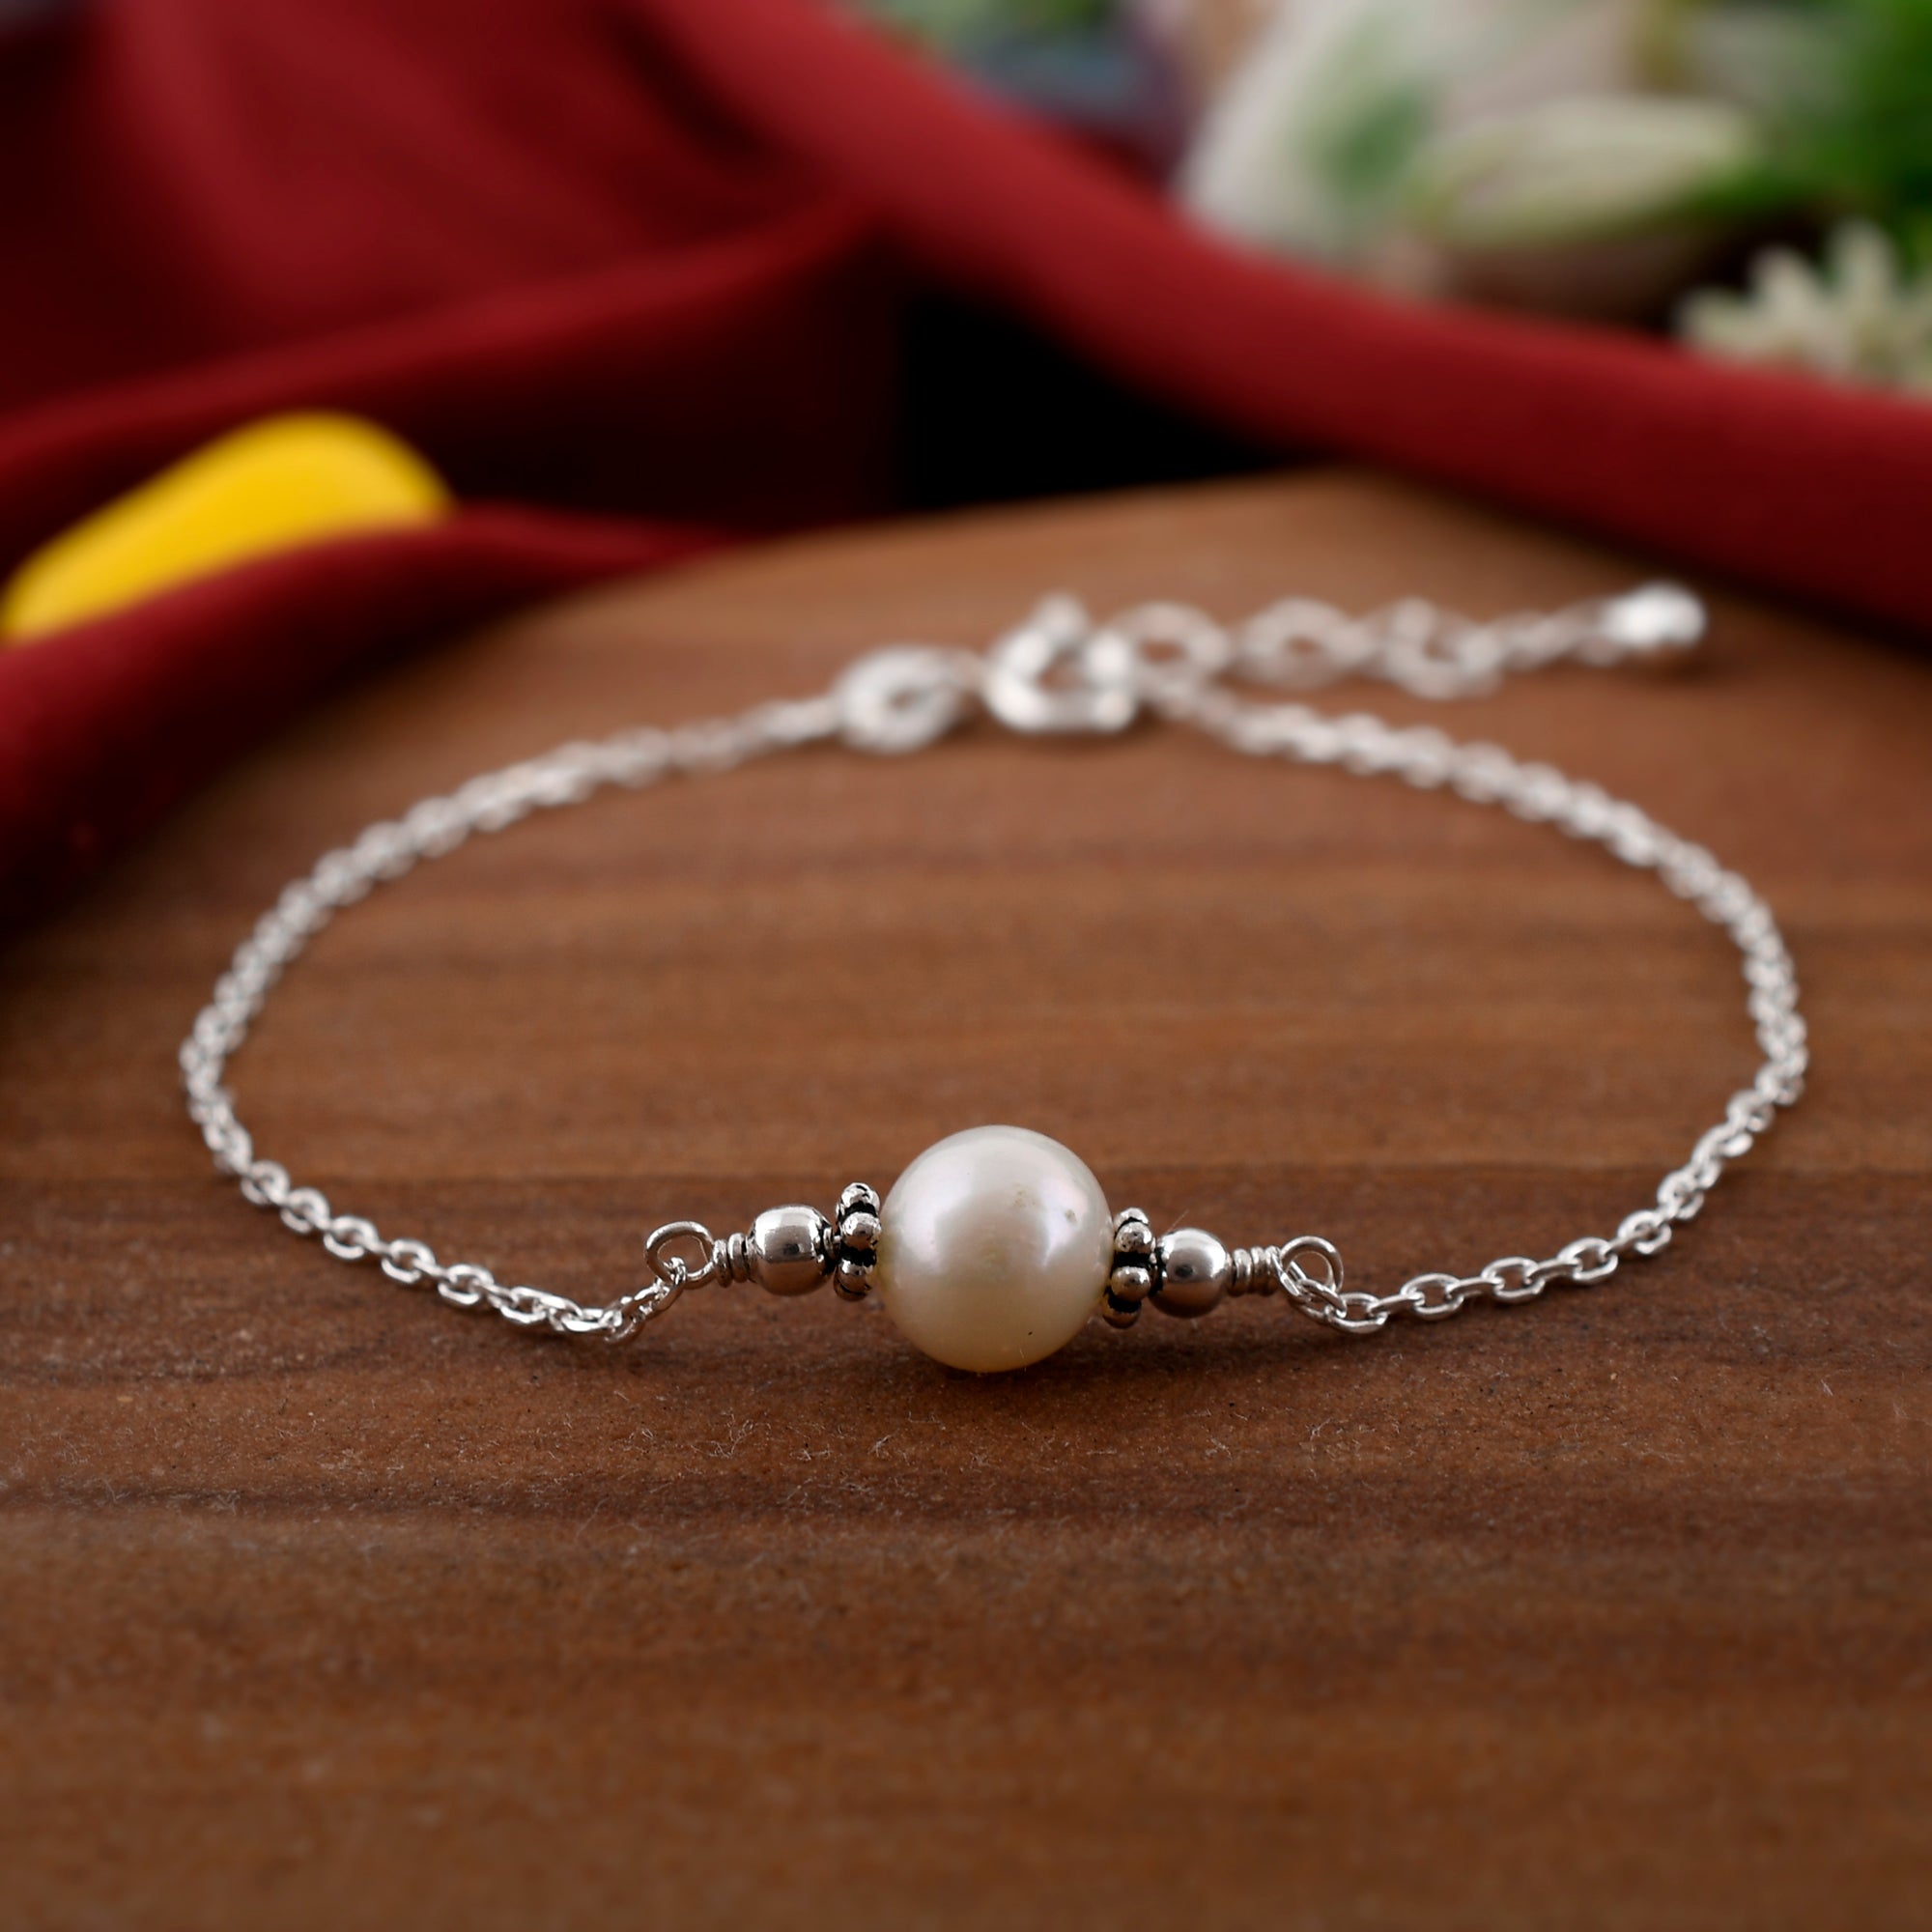 Taraash 925 Sterling Silver Pearl Bangle For Women